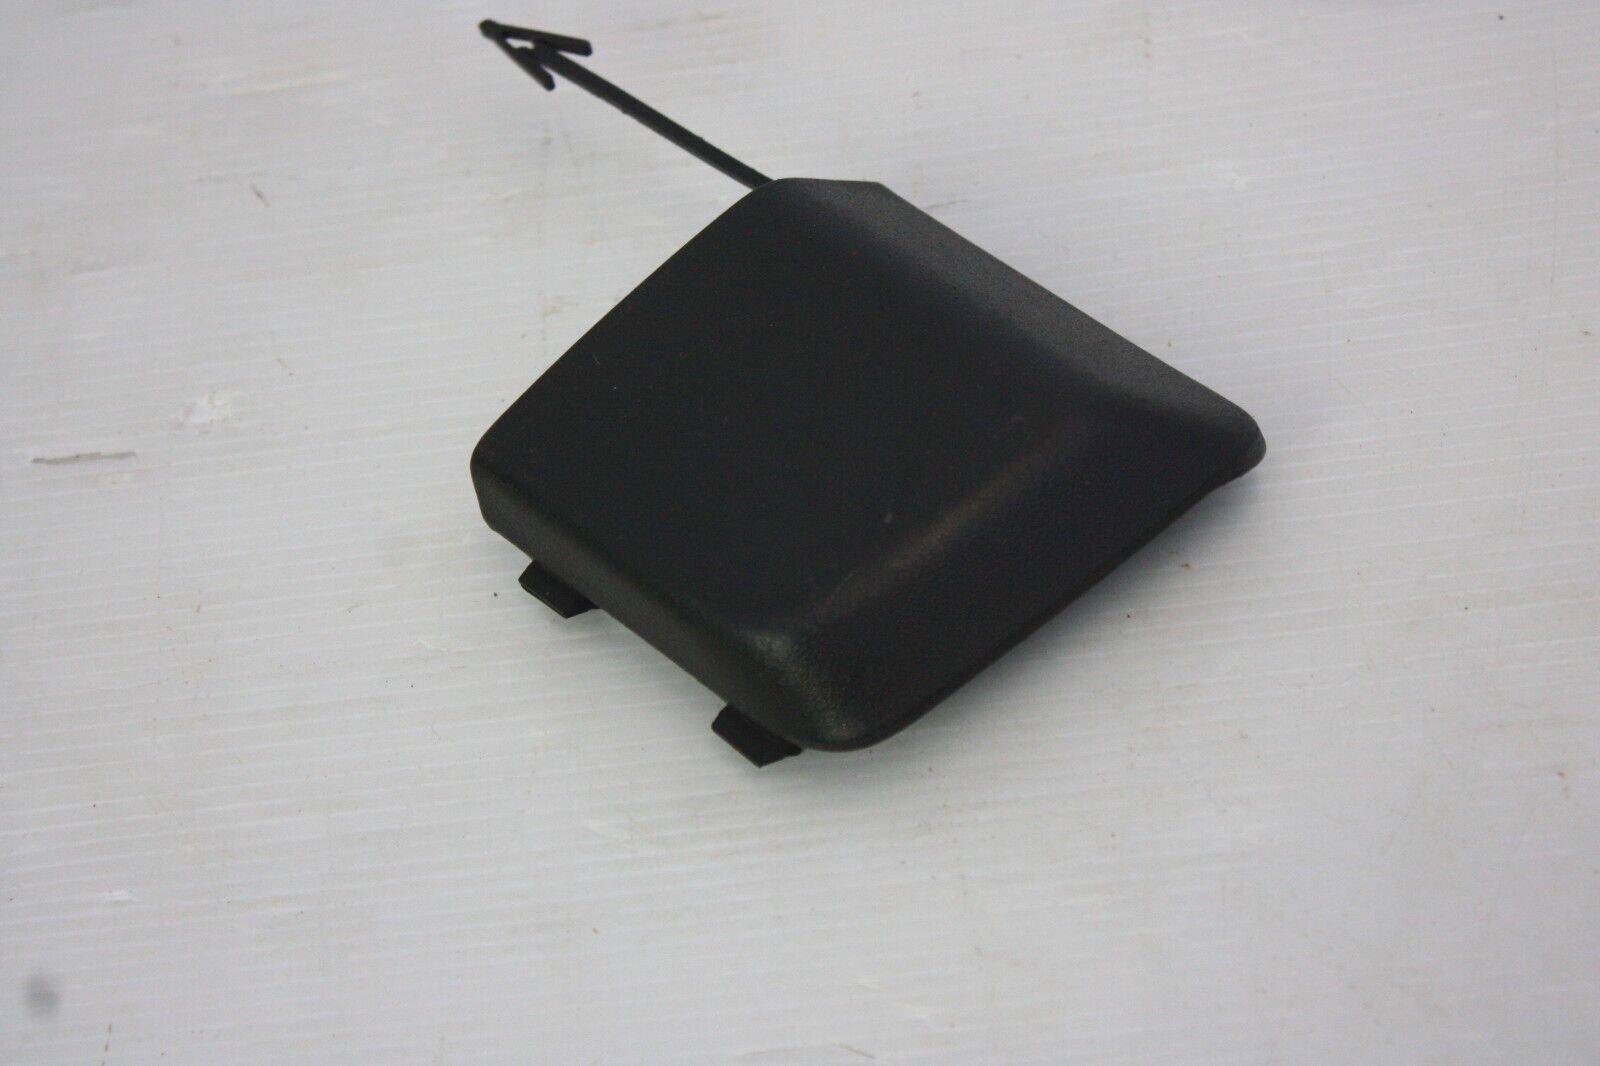 Ford-Galaxy-Rear-Bumper-Tow-Cover-2006-TO-2010-6M21-17K922-AC-NEED-RESPRAY-175509313524-2